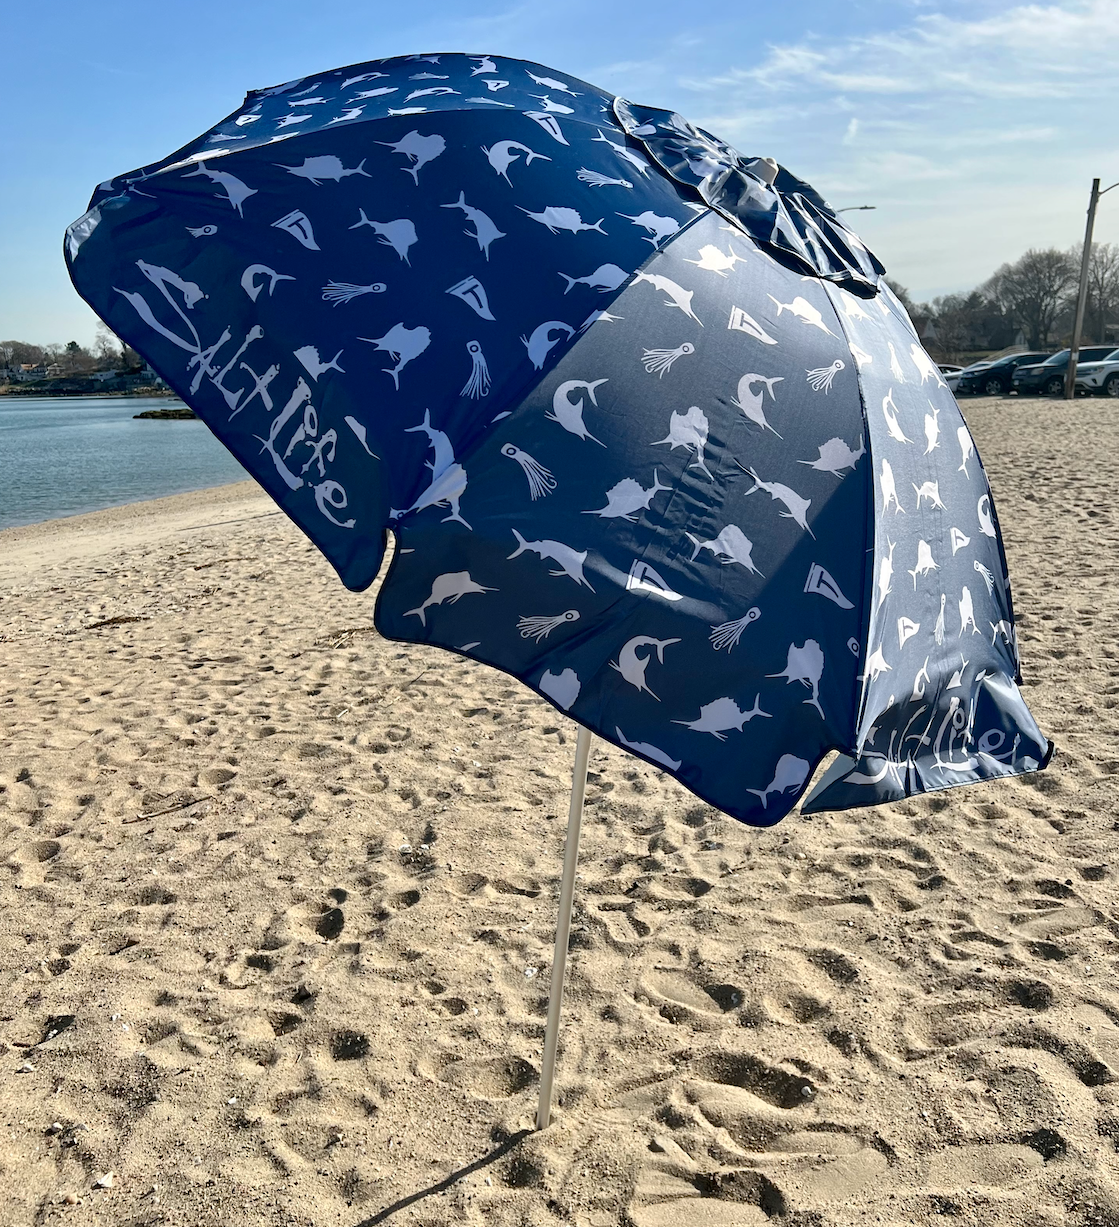 BuzzFeed writer's image of the blue umbrella in the sand at a beach